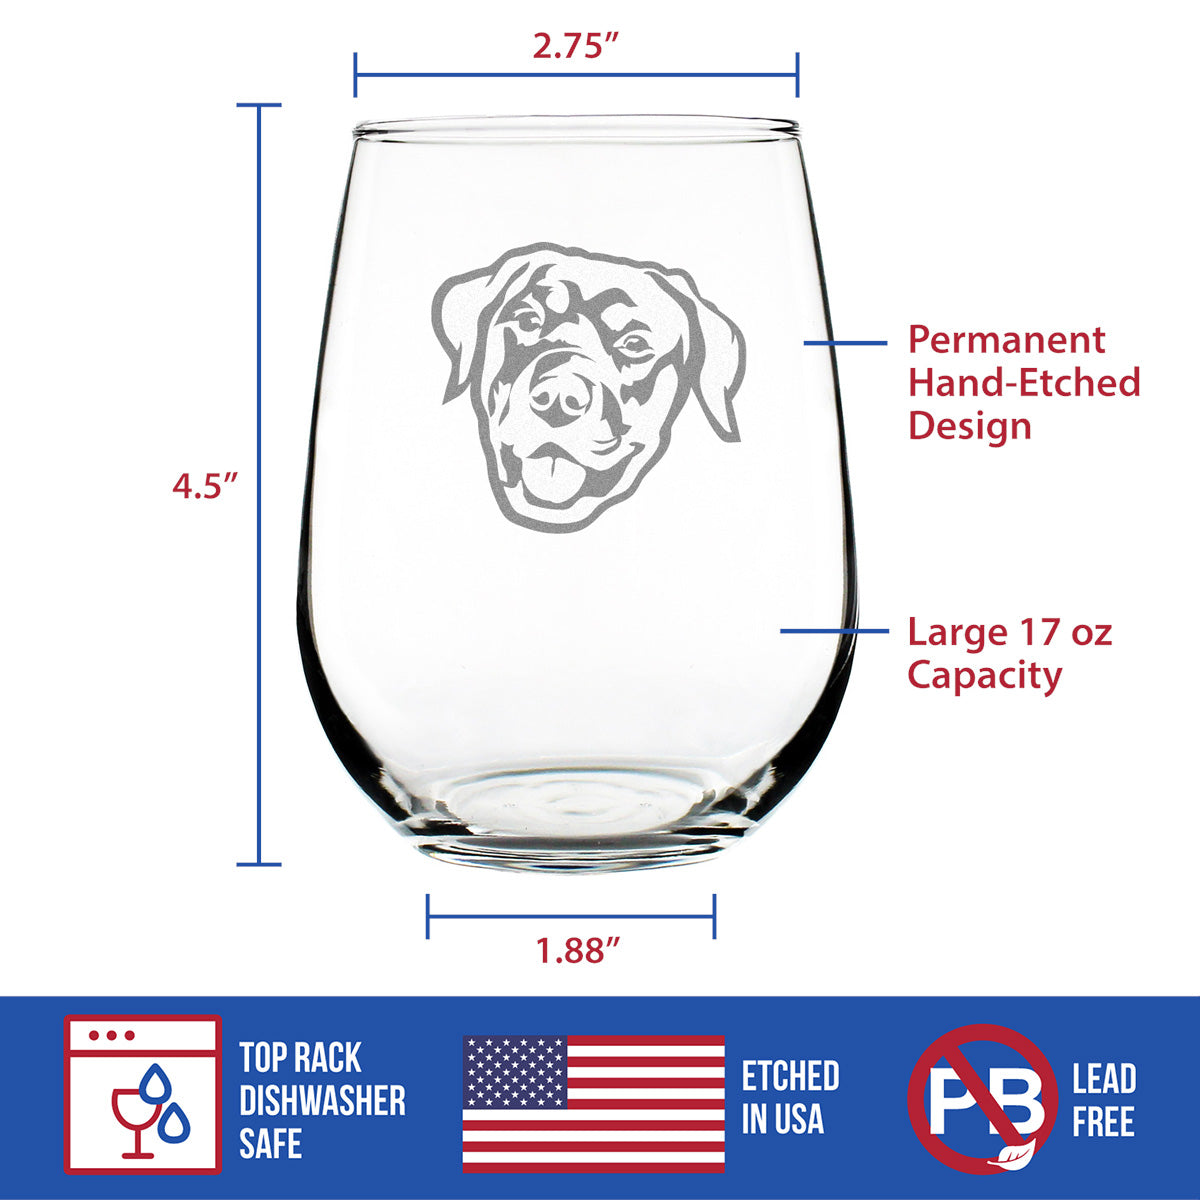 Happy Rottweiler - Stemless Wine Glass - Cute Rottweiler Themed Dog Gifts and Party Decor for Women and Men - Large Glasses